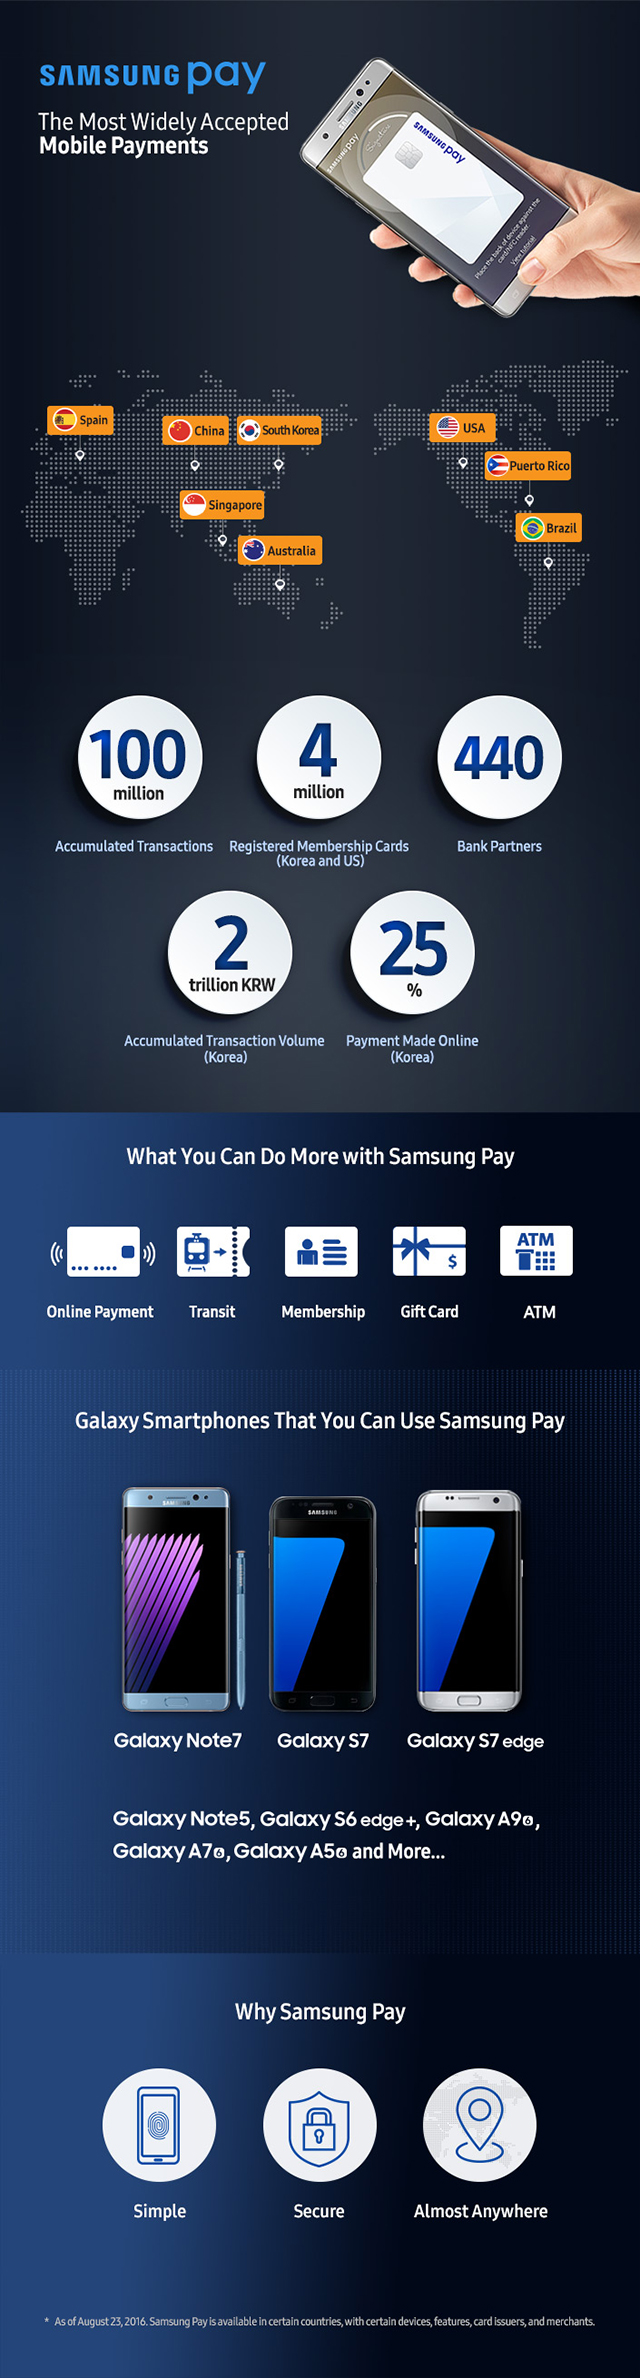 [Infographic] Samsung Pay Celebrates First Year's Achievements